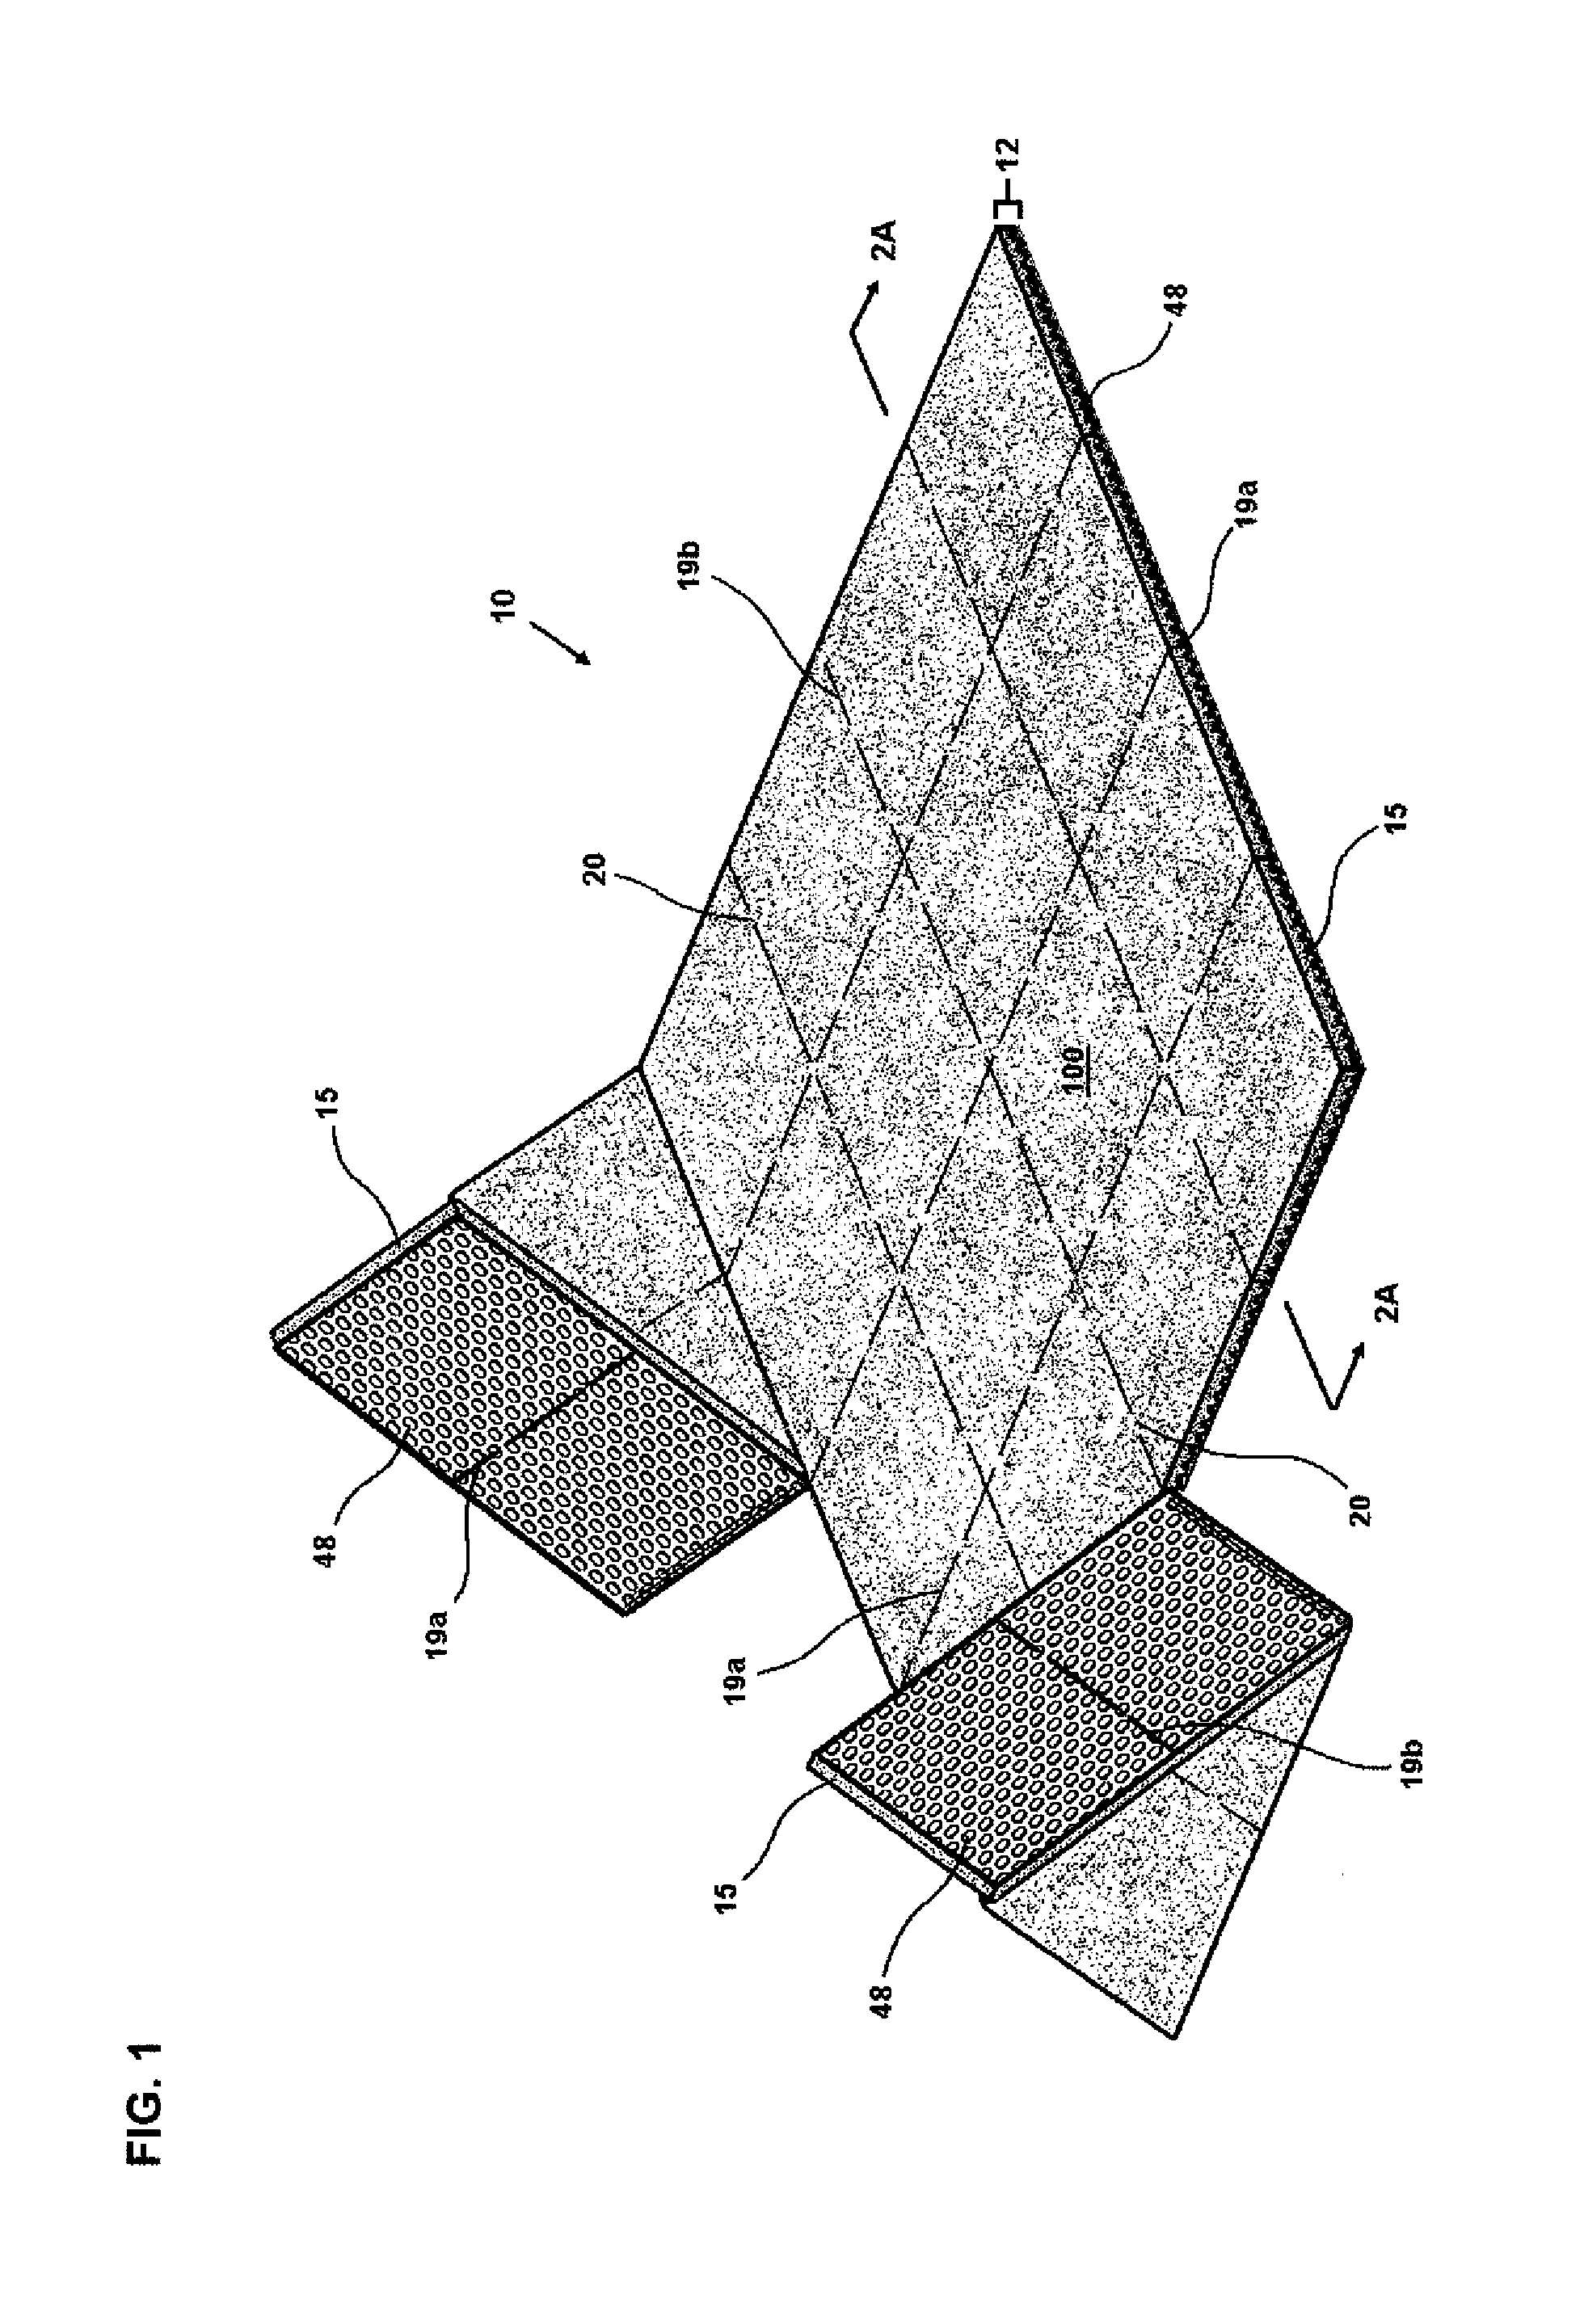 Perforated monolayer, nonslip, non-adhesive surface covering